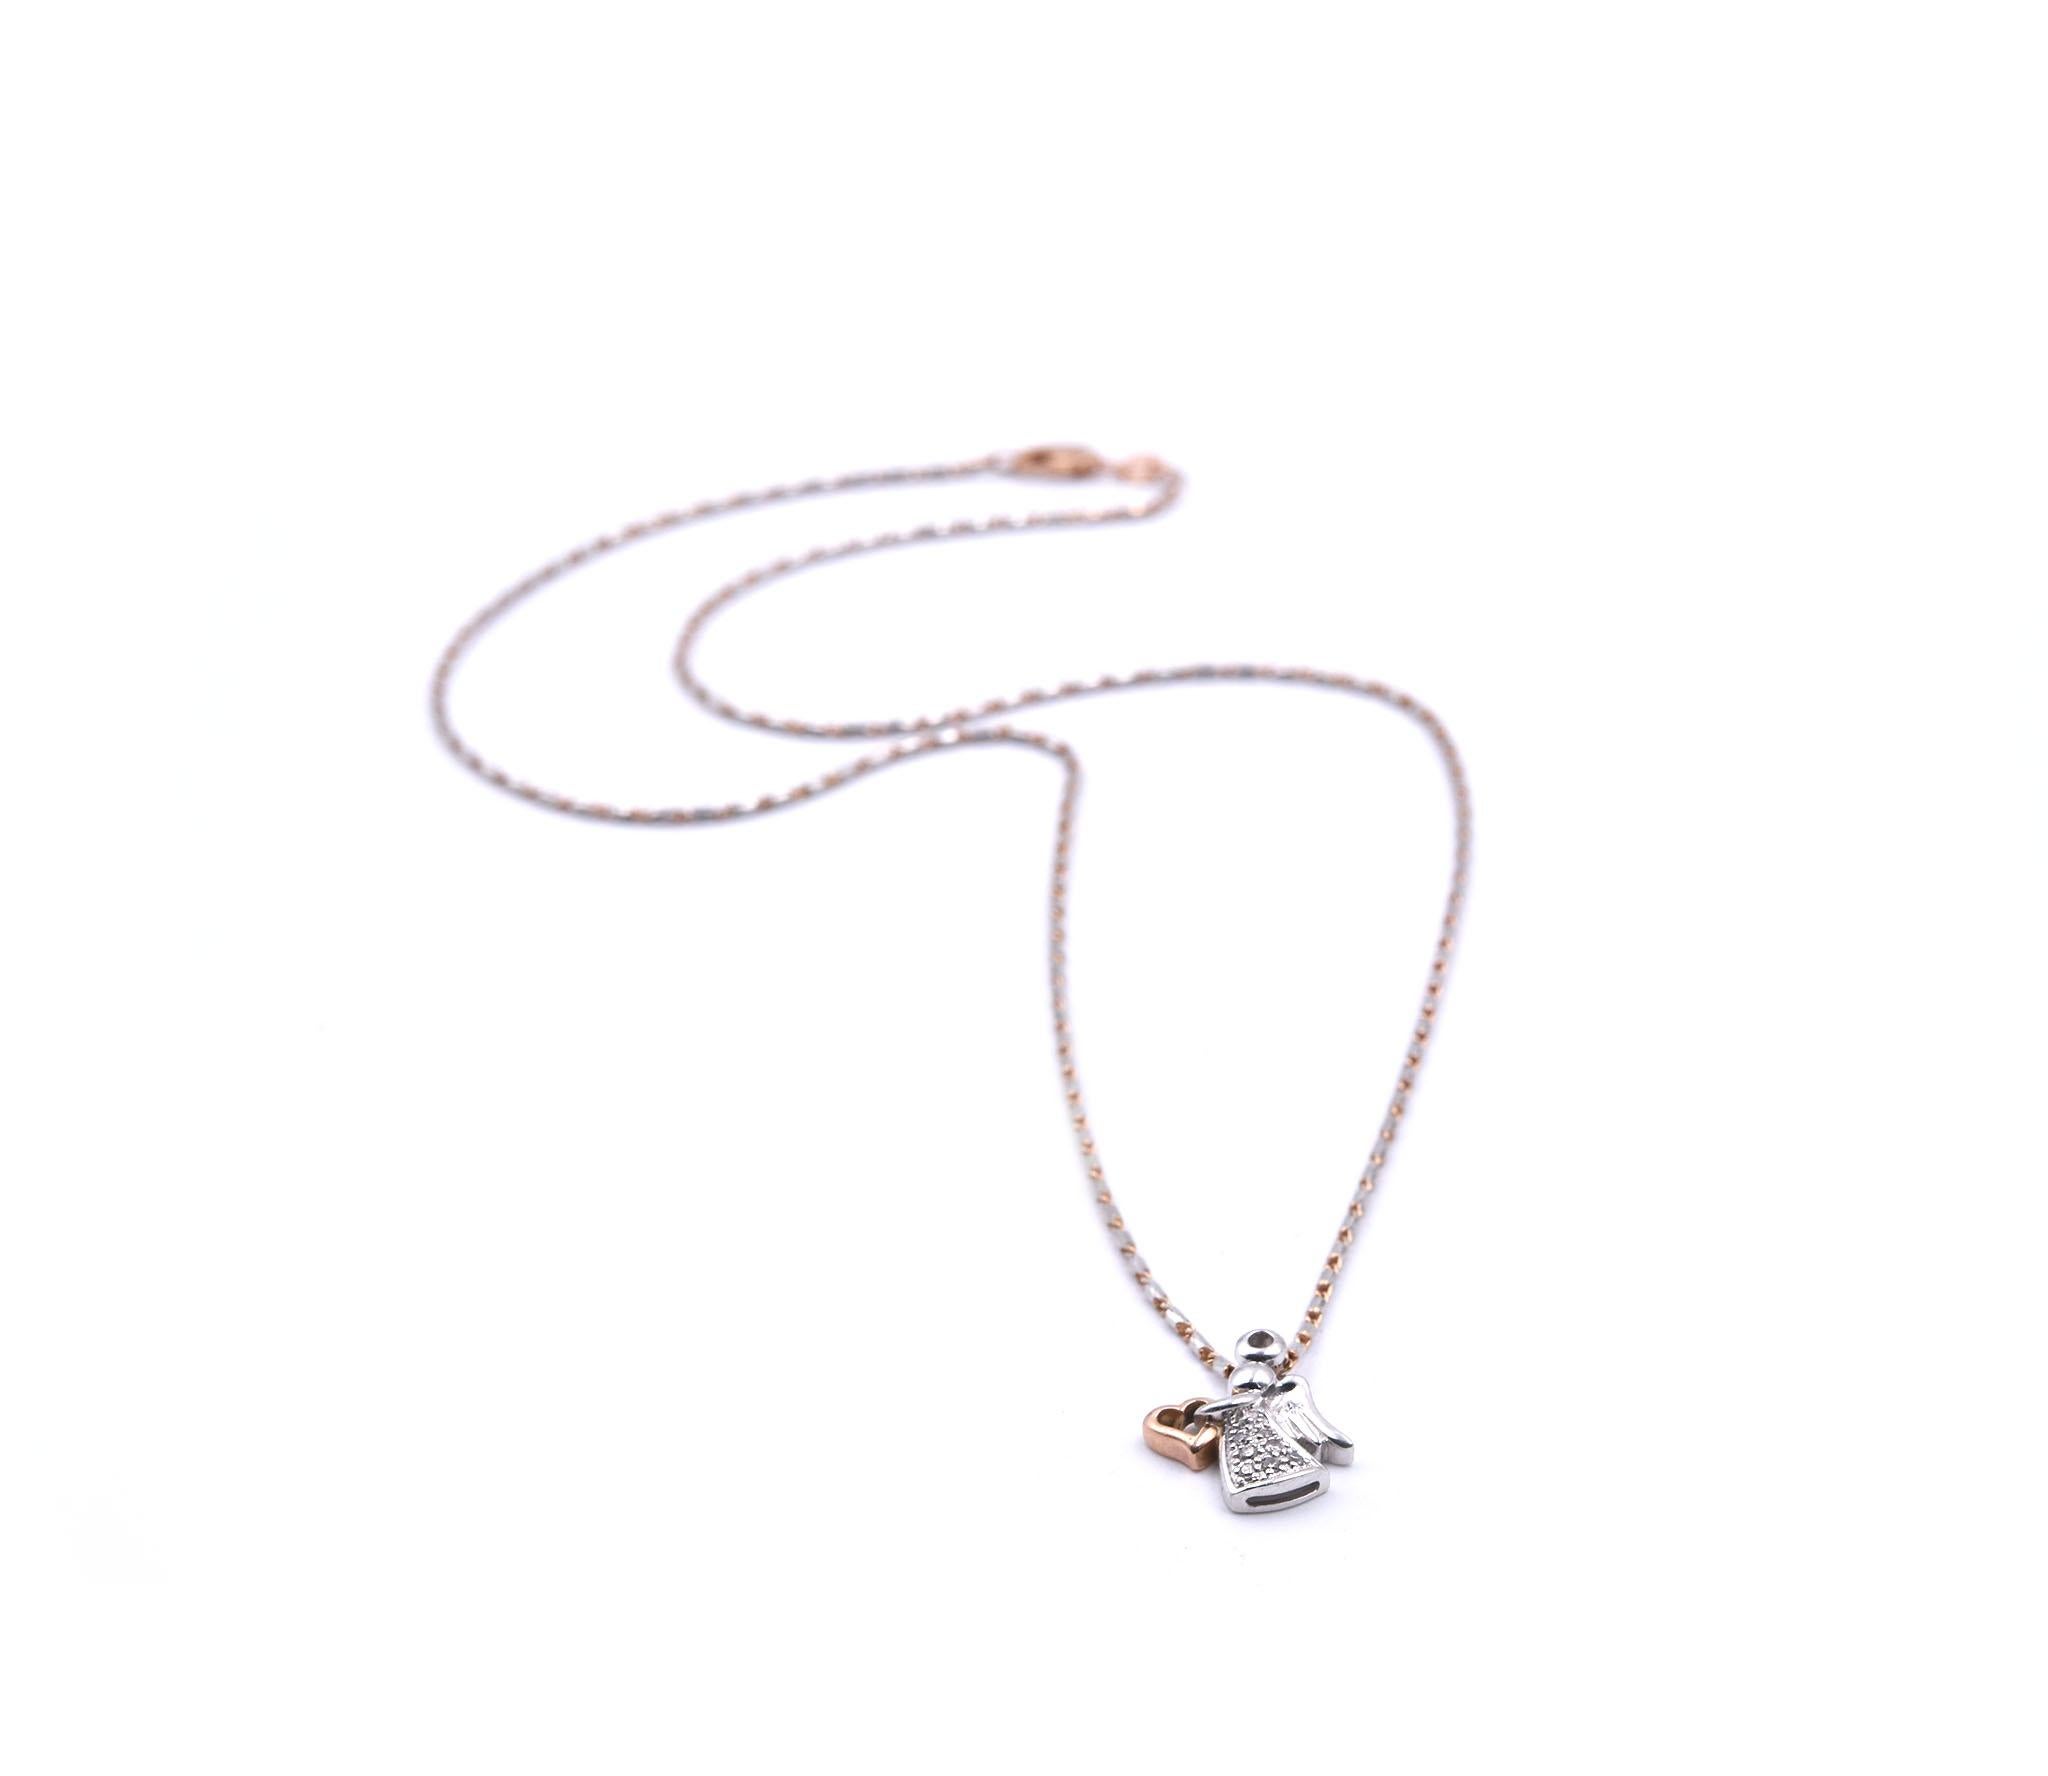 Designer: custom design
Material: 14k white and rose gold
Diamonds: 8 round brilliant cut = .04cttw
Color: G
Clarity: VS
Dimensions: necklace is 18-inches, angel pendant is ½-inch long and 13.22mm Weight: 19.57 grams 
